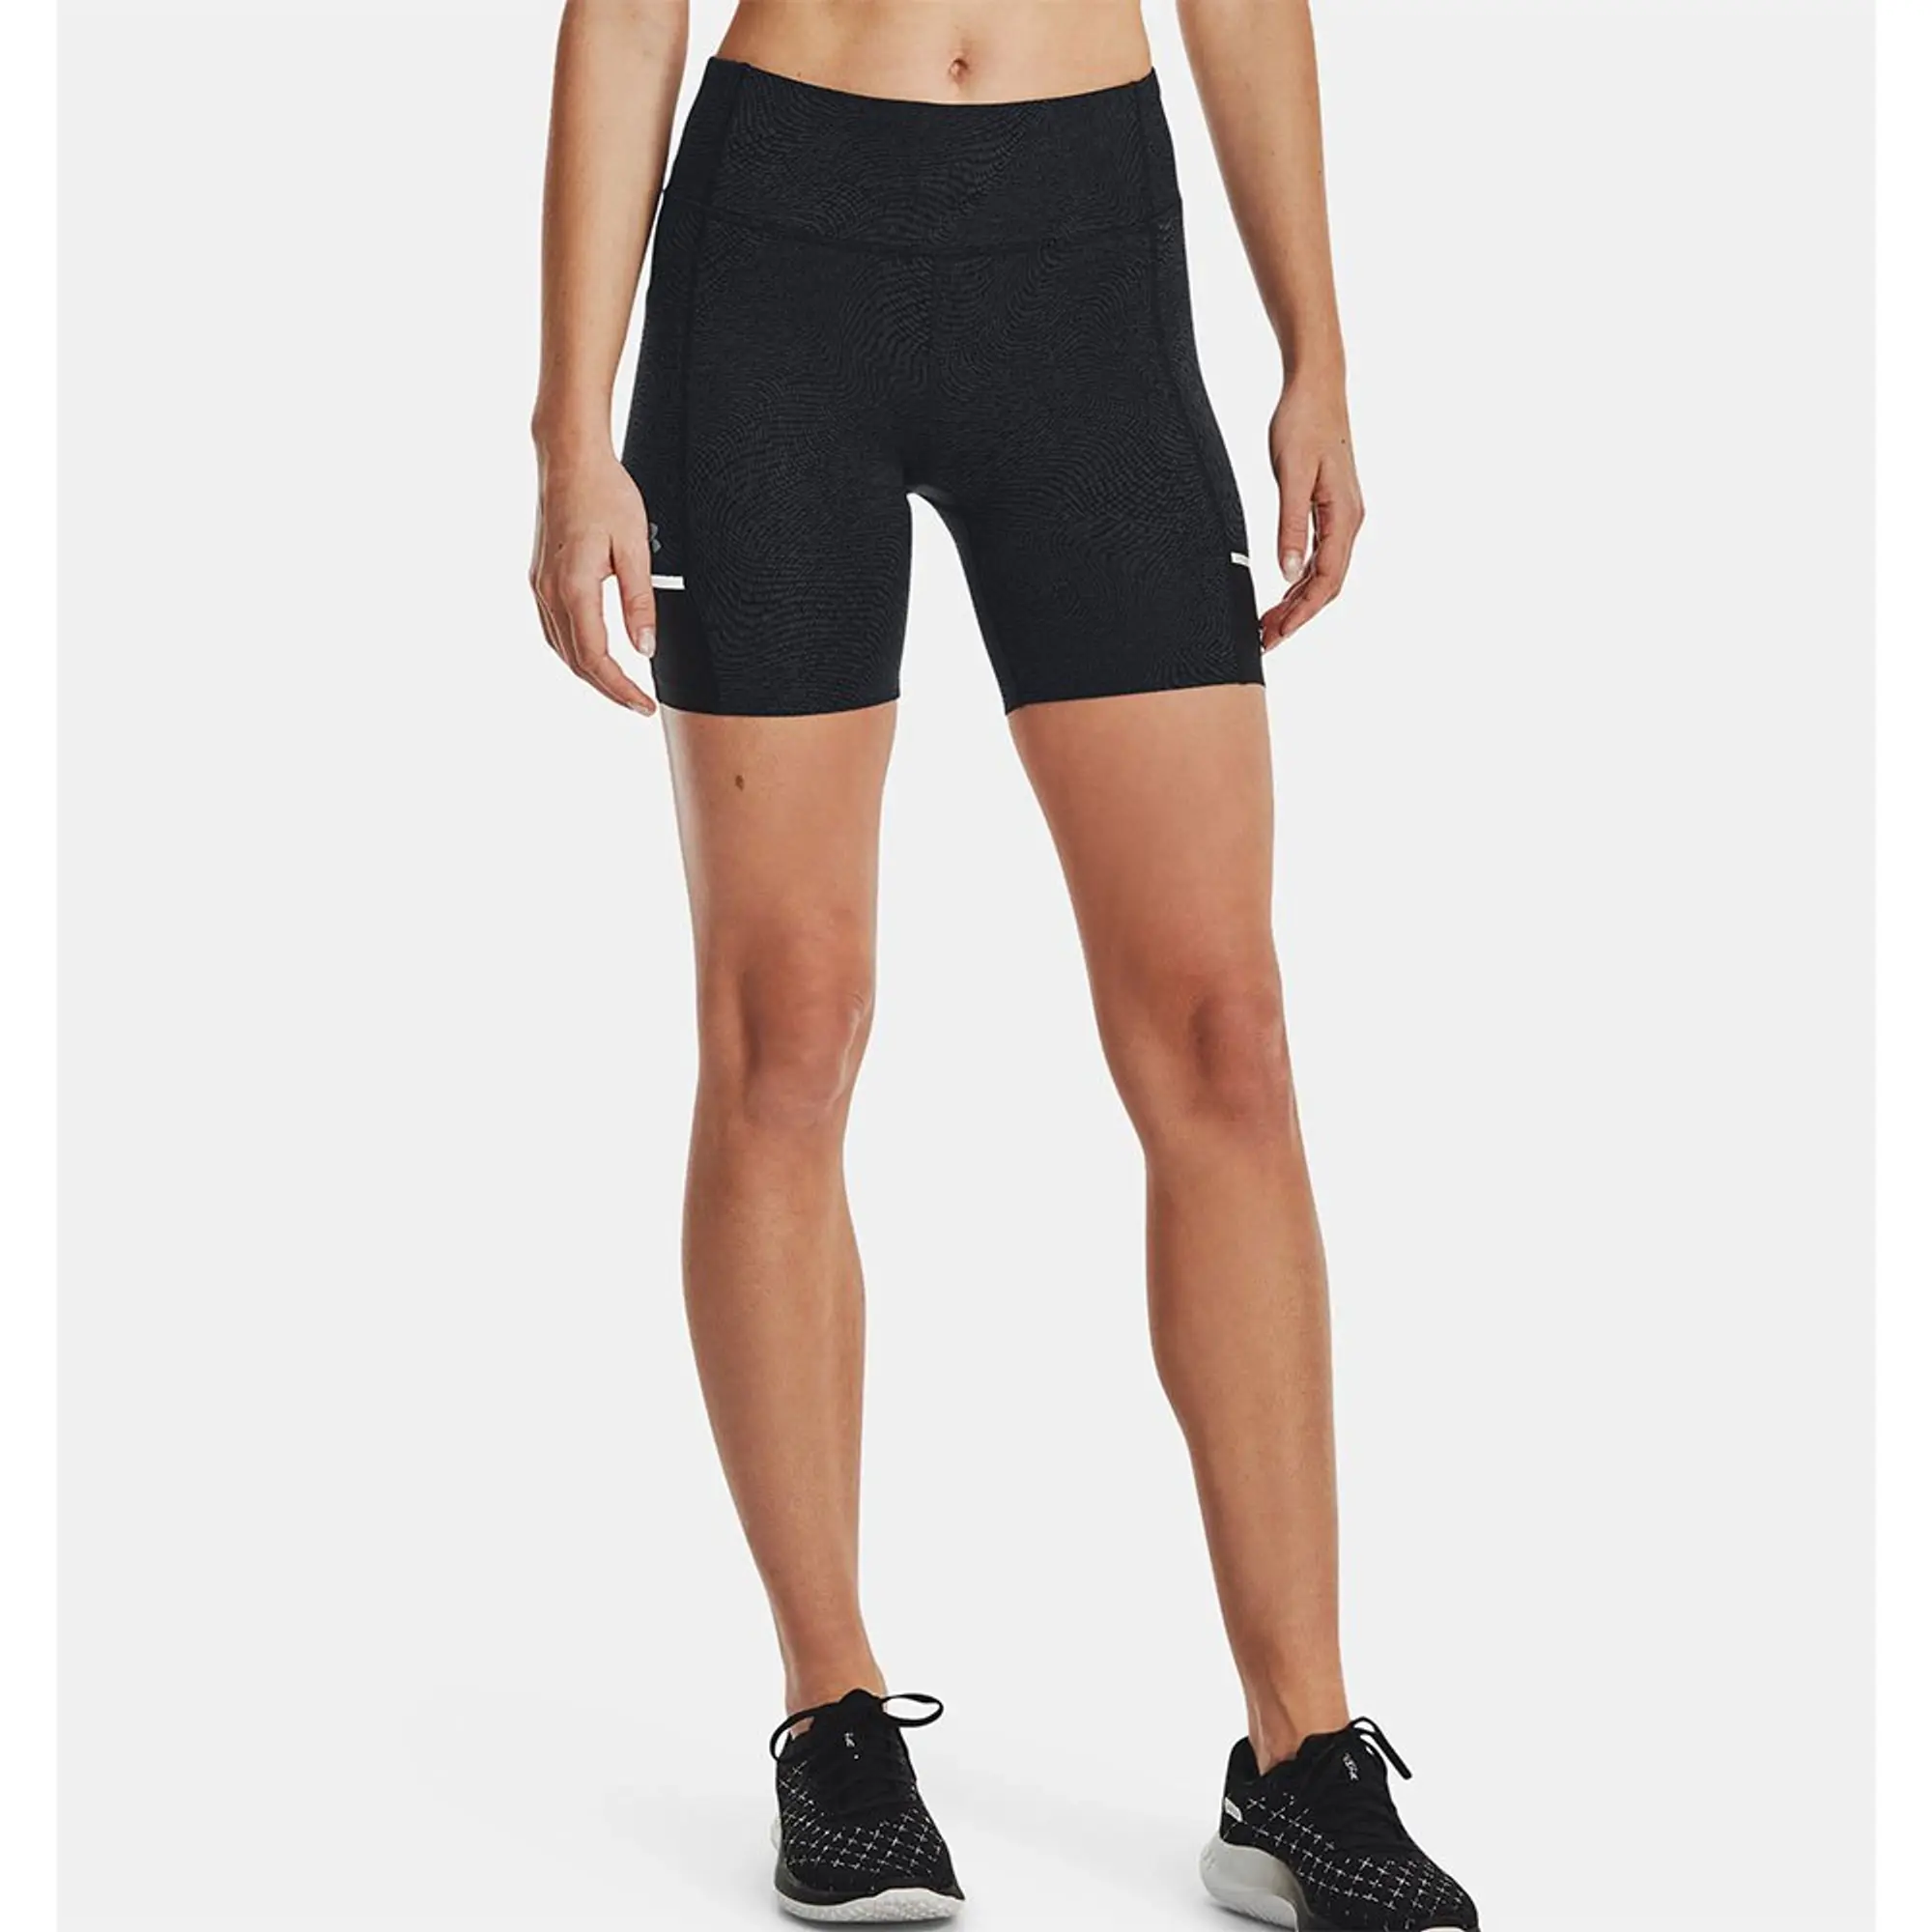 Under Armour Fly Fast 3.0 Half Tights Womens - Black